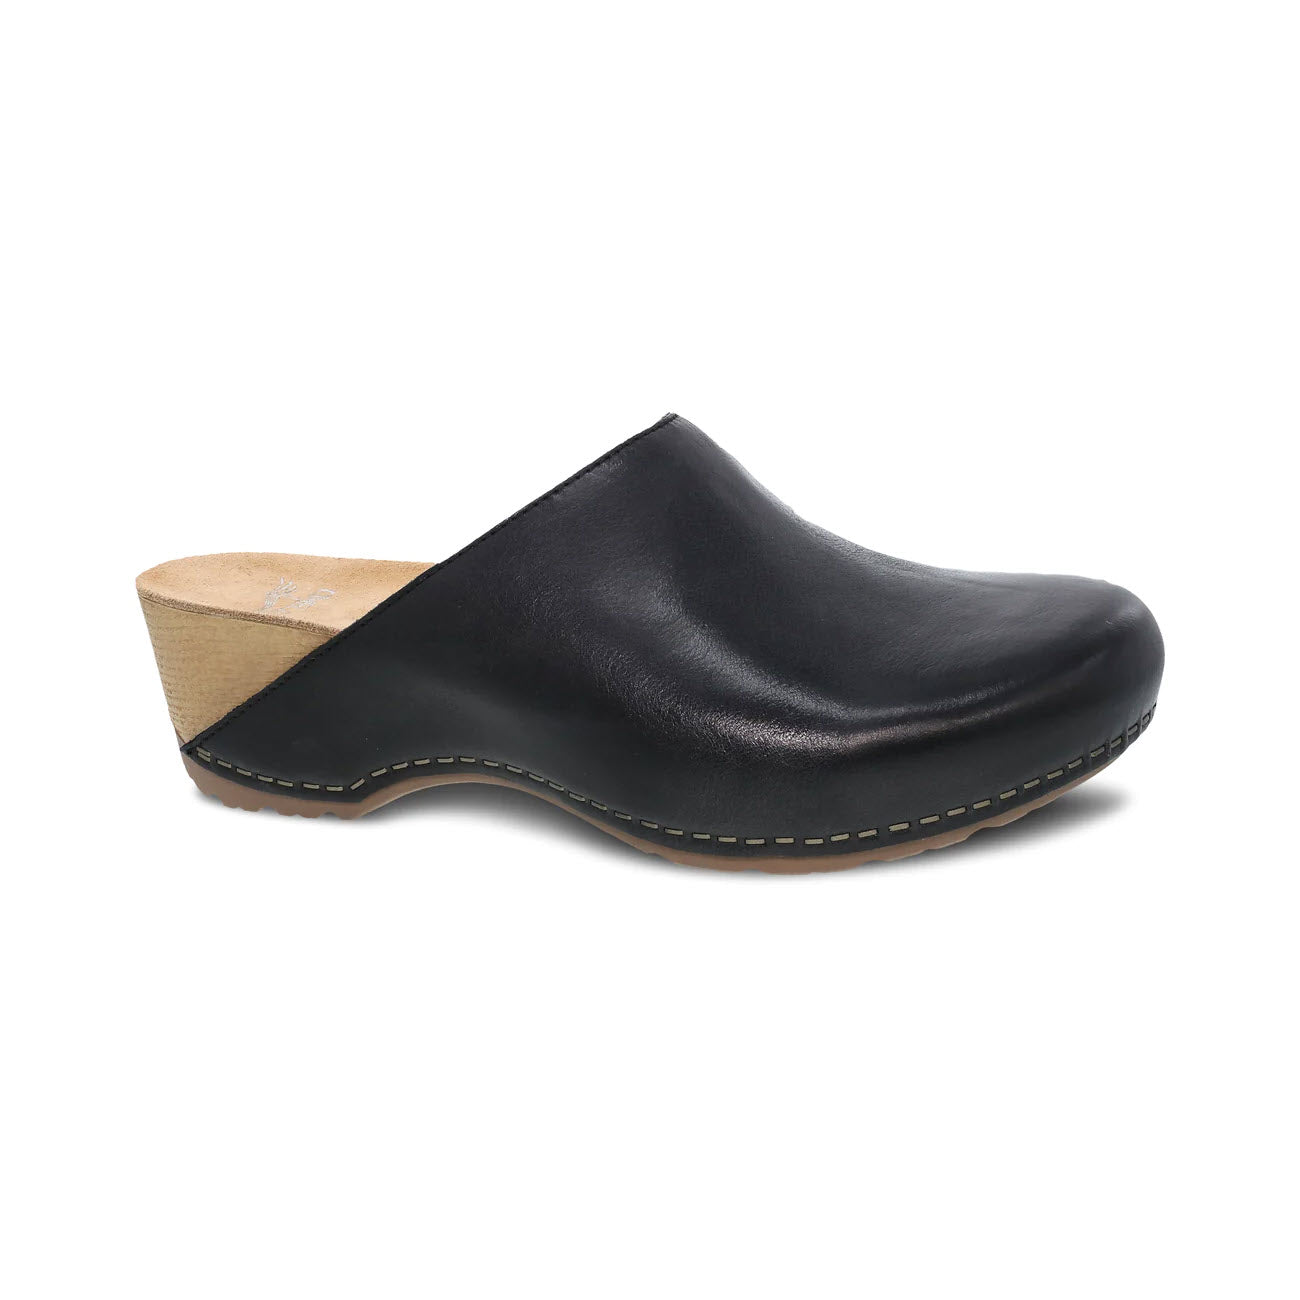 Black leather Dansko Talulah mule with a wooden heel and visible stitching, isolated on a white background.